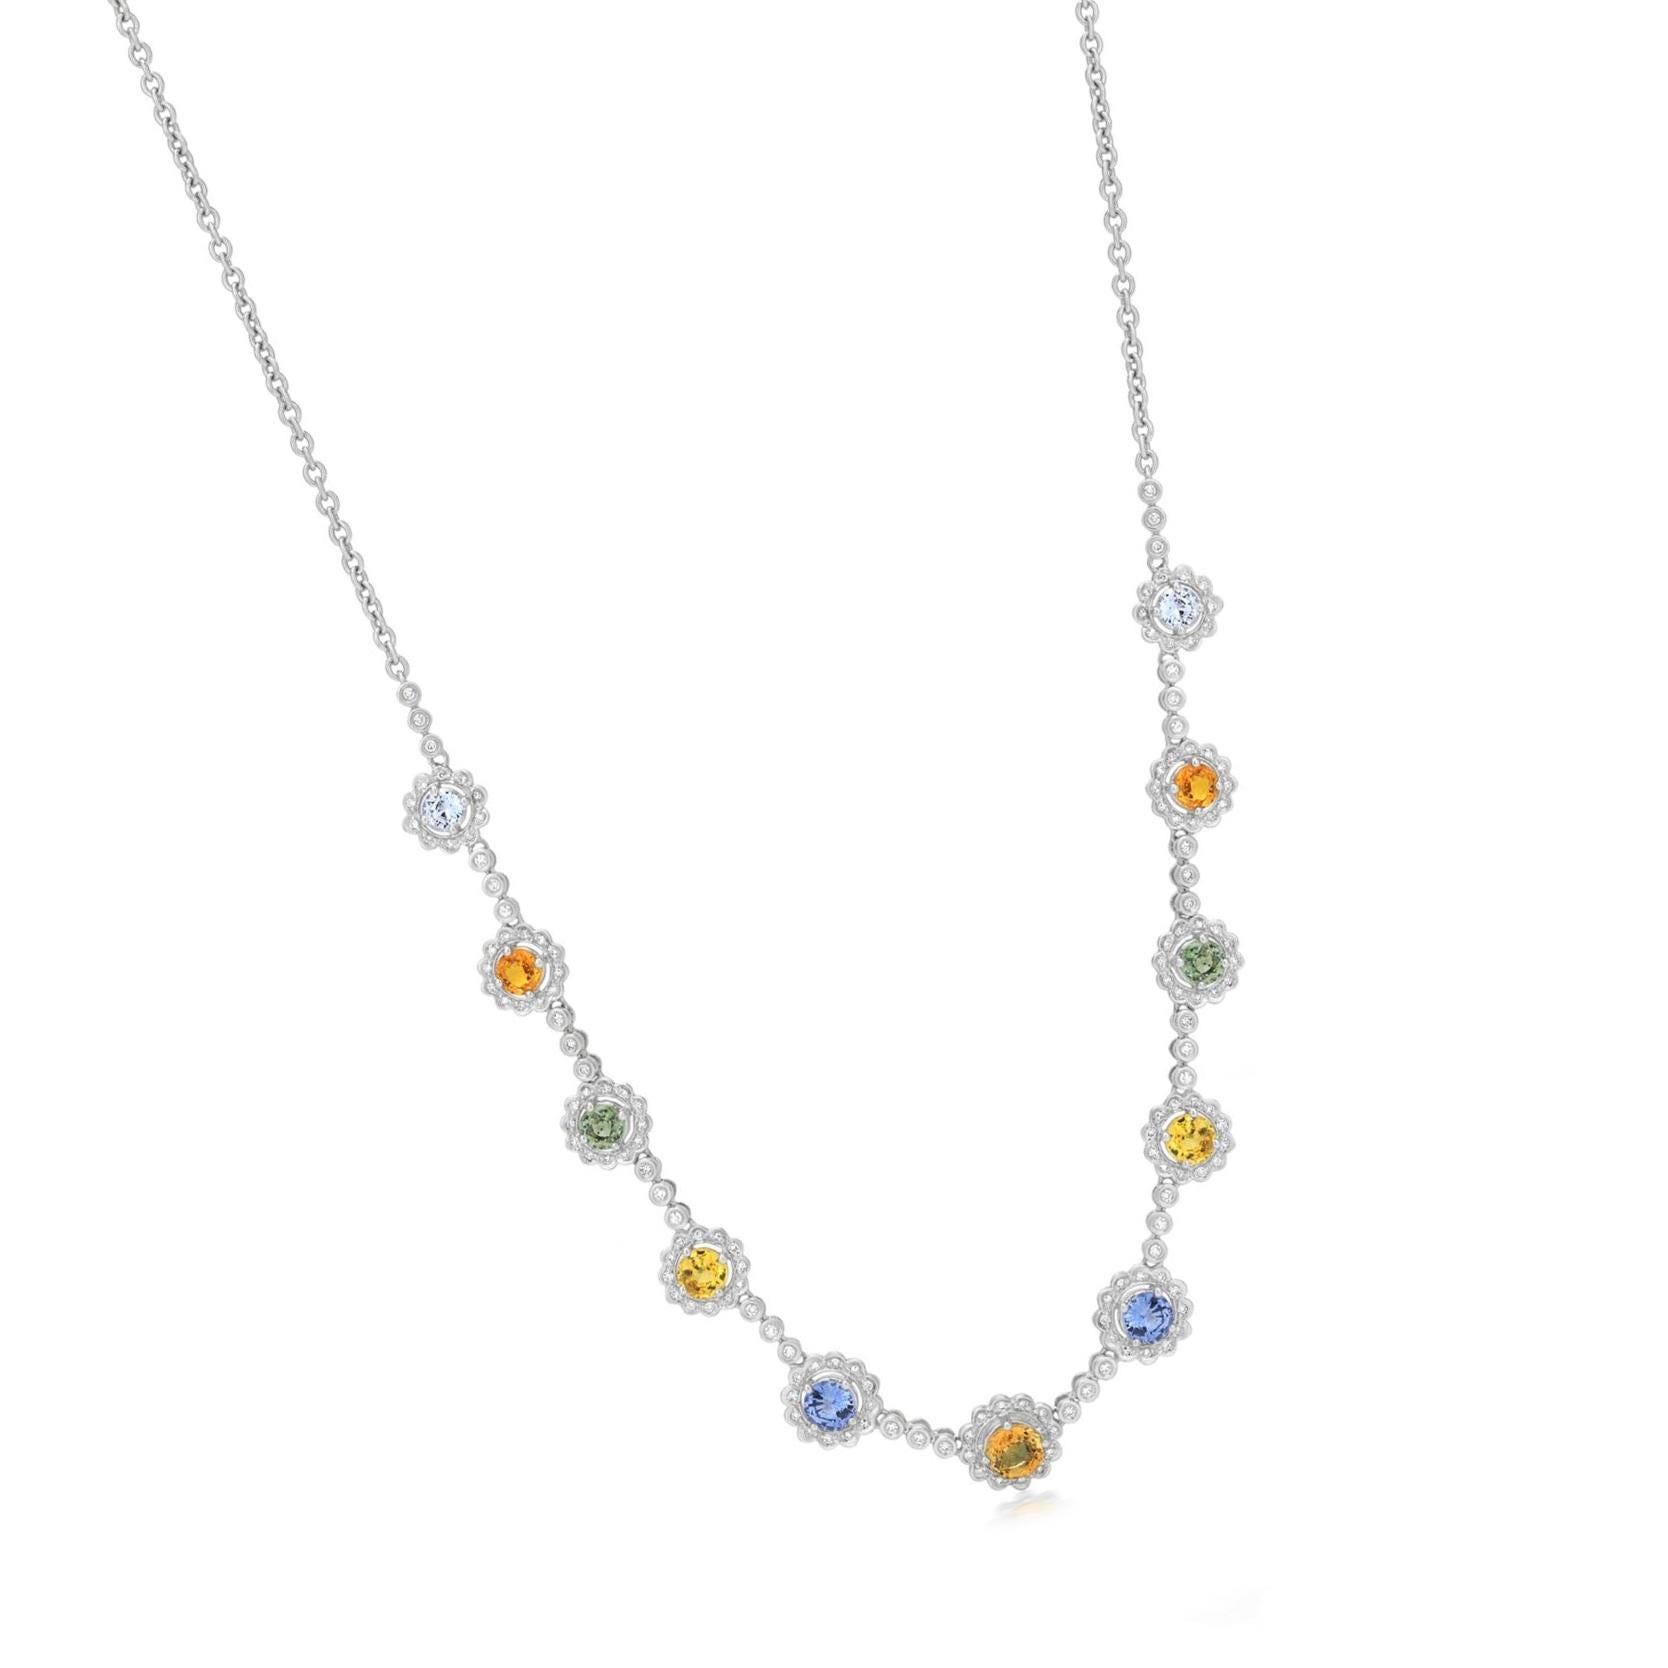 Round Cut Gemistry 5.57CT Multi Sapphire Station Necklace with Diamond Accents in 18k Gold